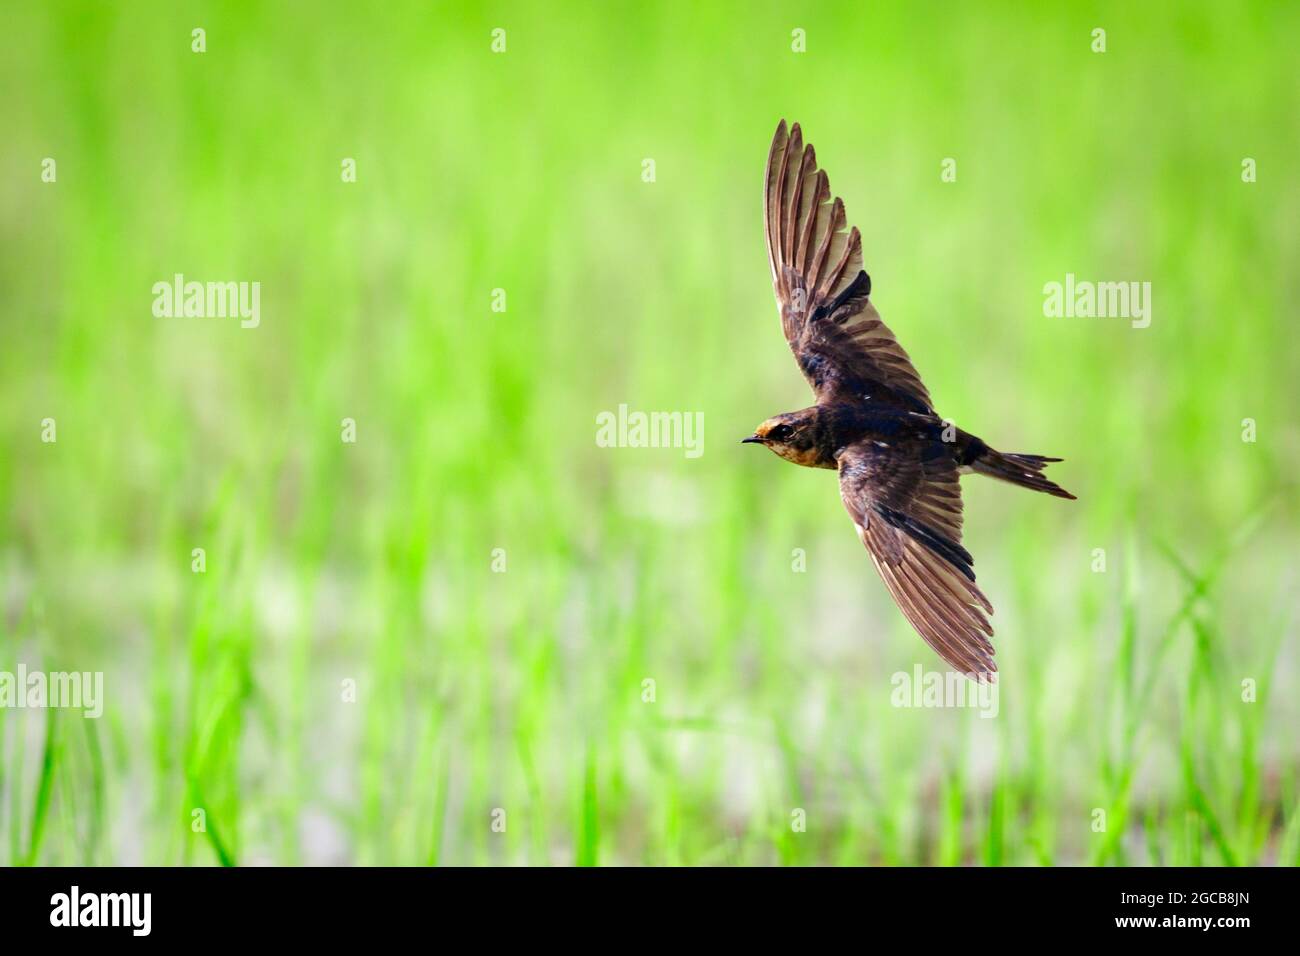 Image of barn swallow flying in the middle of a field on a natural background. Bird. Animal. Stock Photo